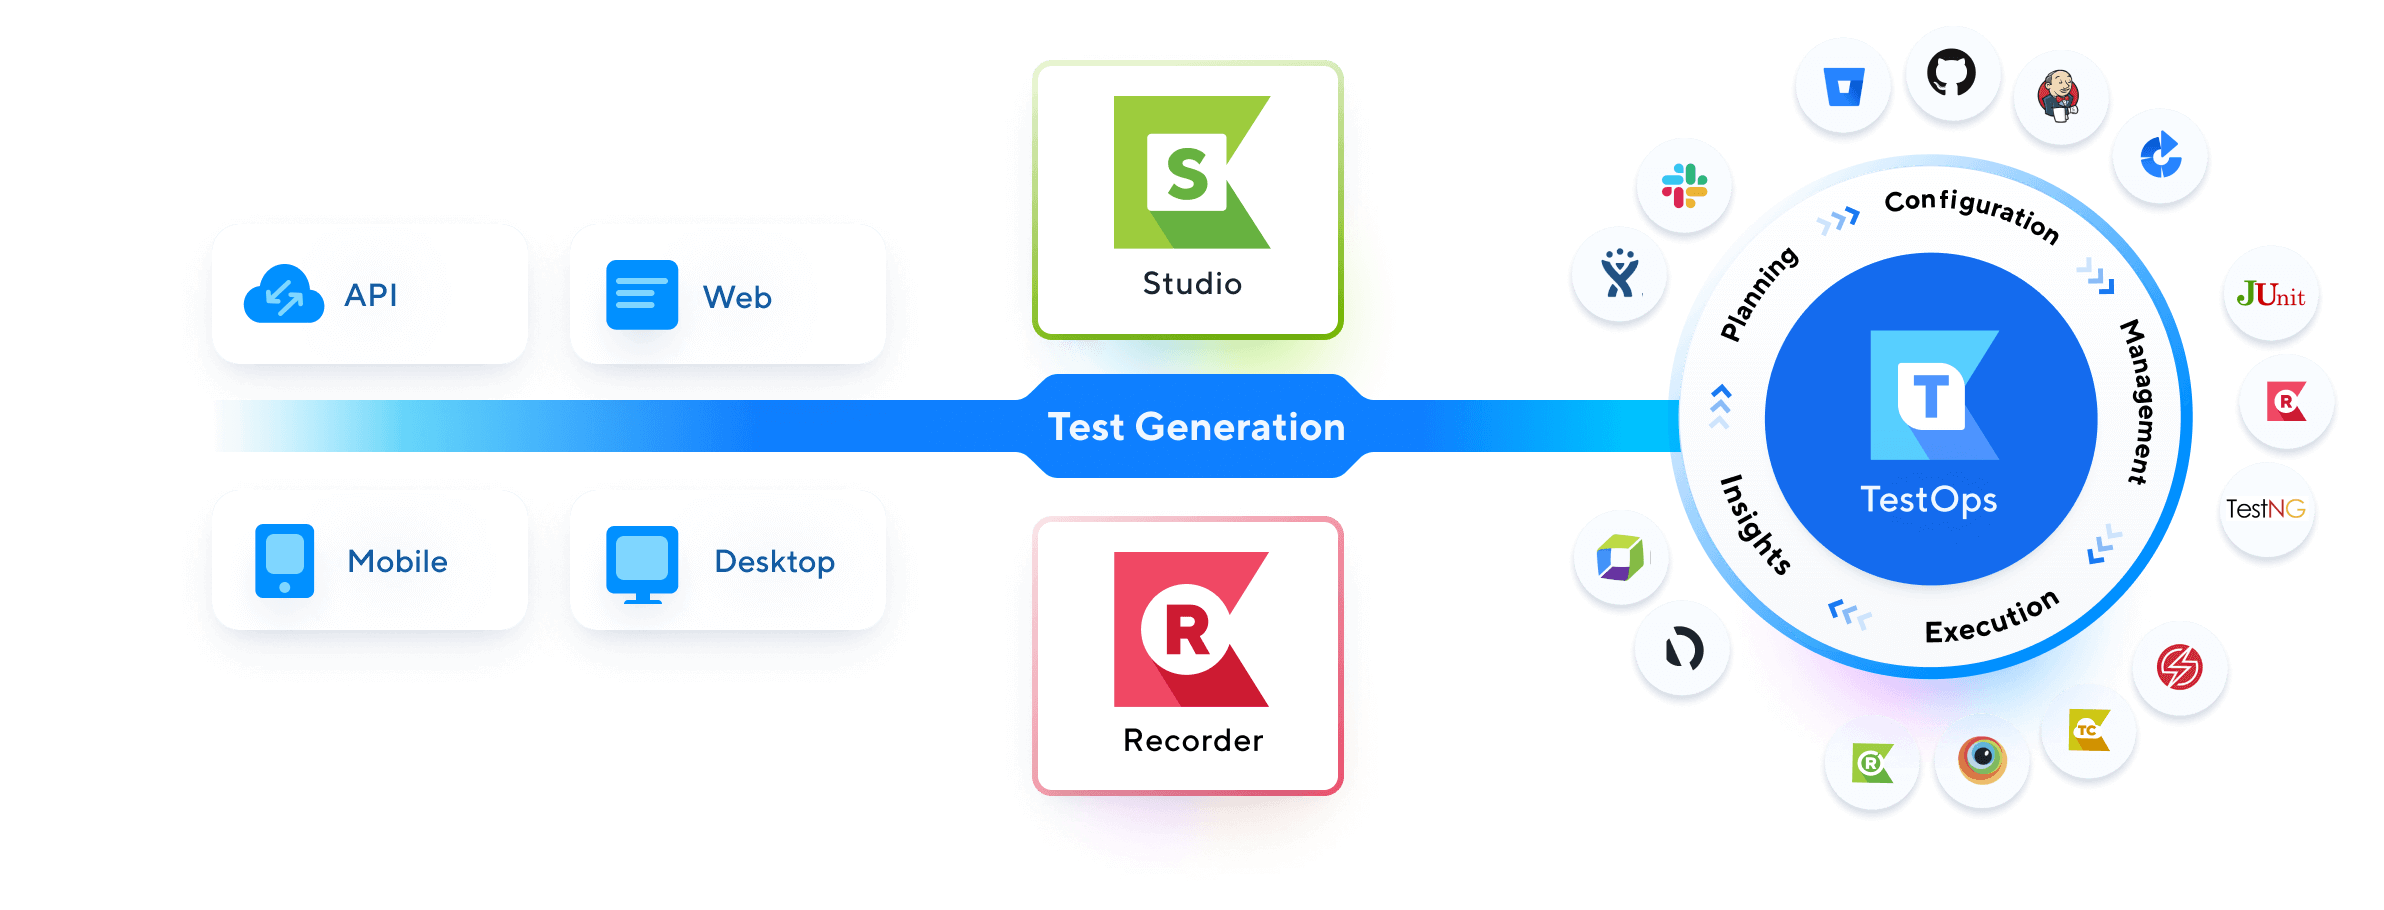 Built-in integrations for endless testing options.